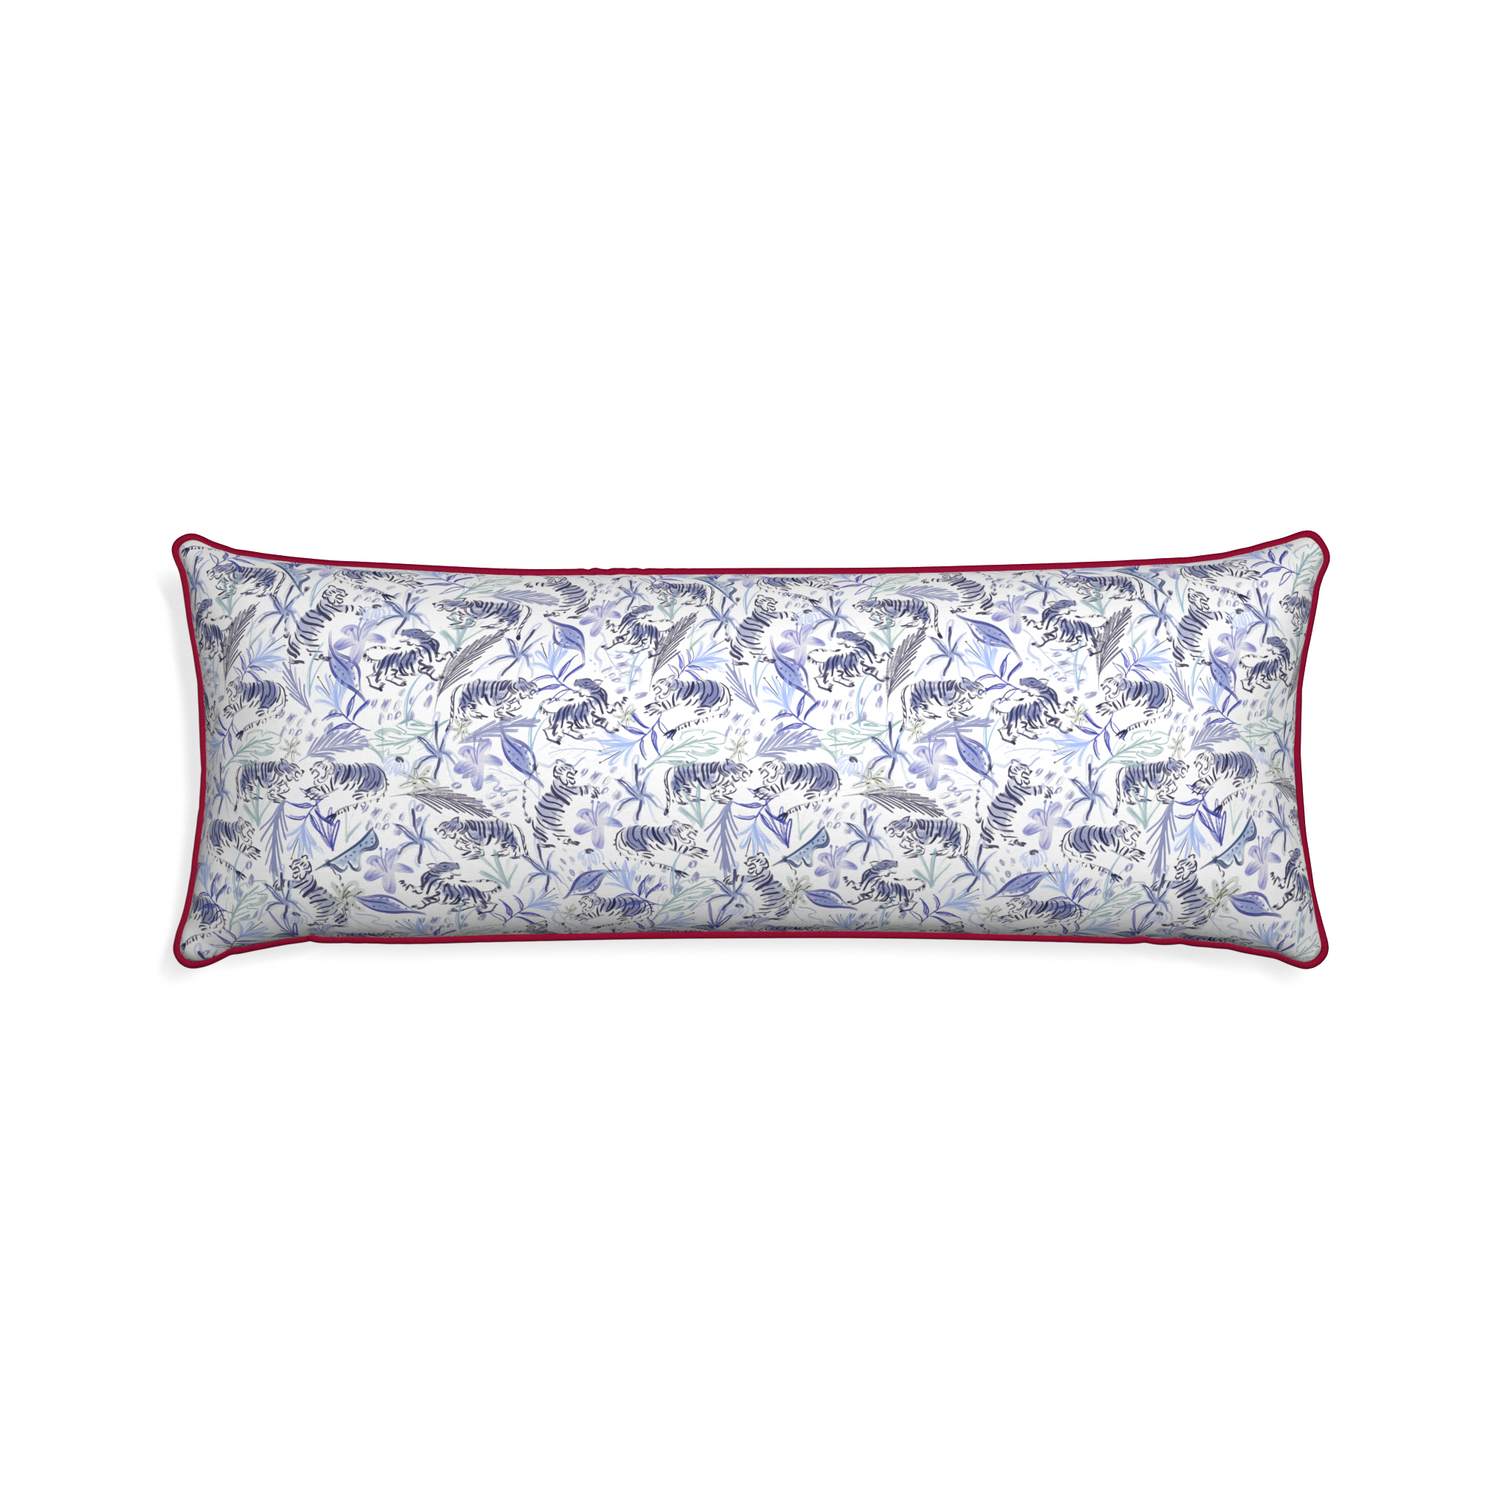 Xl-lumbar frida blue custom blue with intricate tiger designpillow with raspberry piping on white background